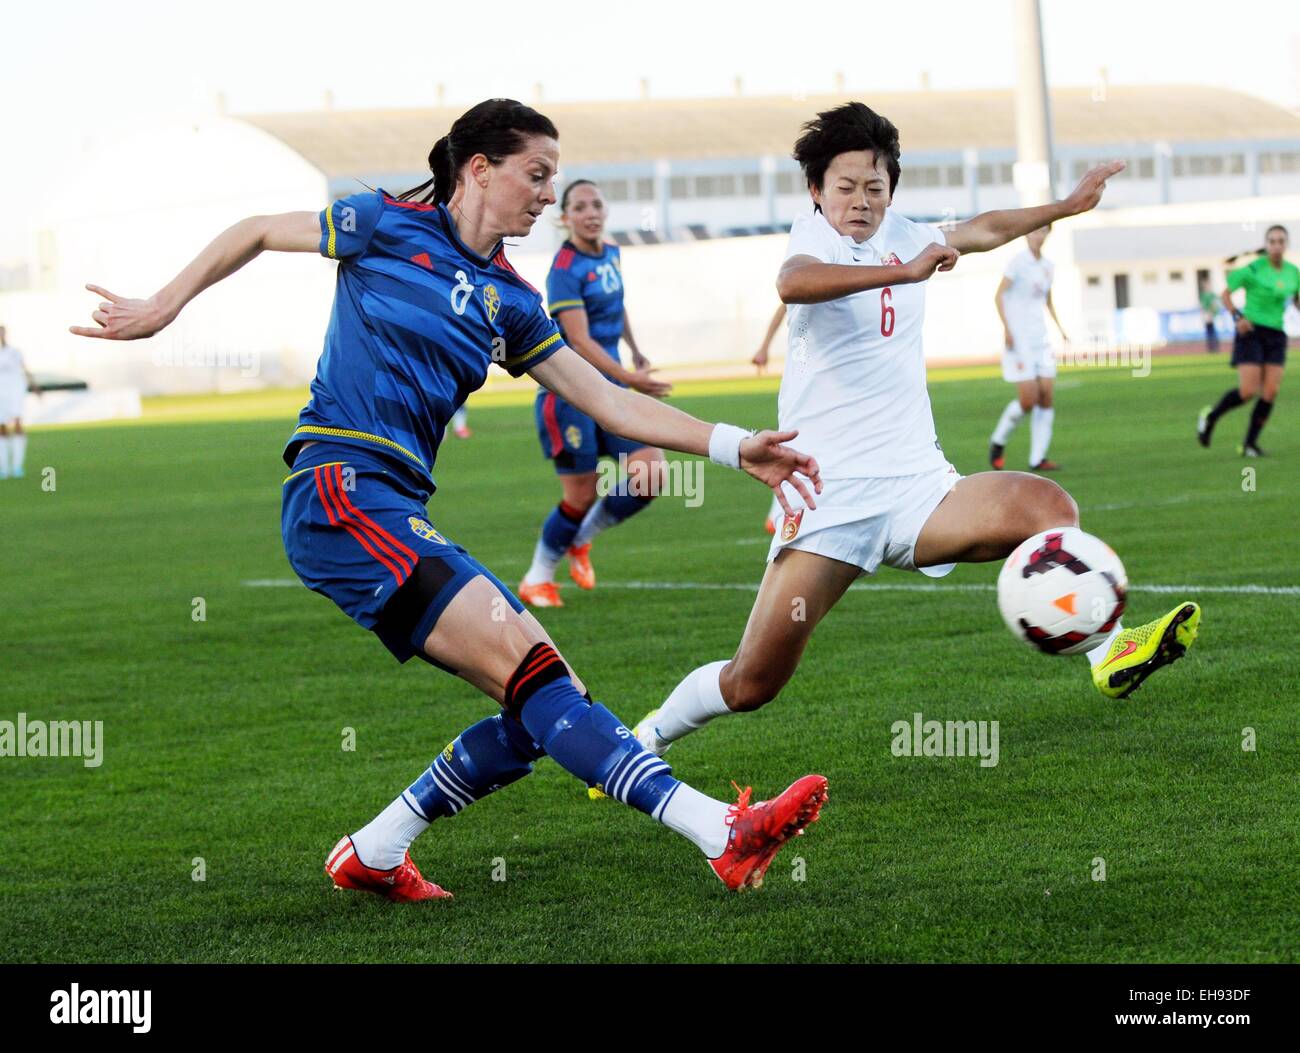 Vrs Antonio. 9th Mar, 2015. Sweden's Lotta Schelin (L) vies with China's Li Dongna during the Algrave Cup football match against China in Vila Real de Santo Antonio on March 9, 2015. Sweden won 3-0. © Zhang Liyun/Xinhua/Alamy Live News Stock Photo